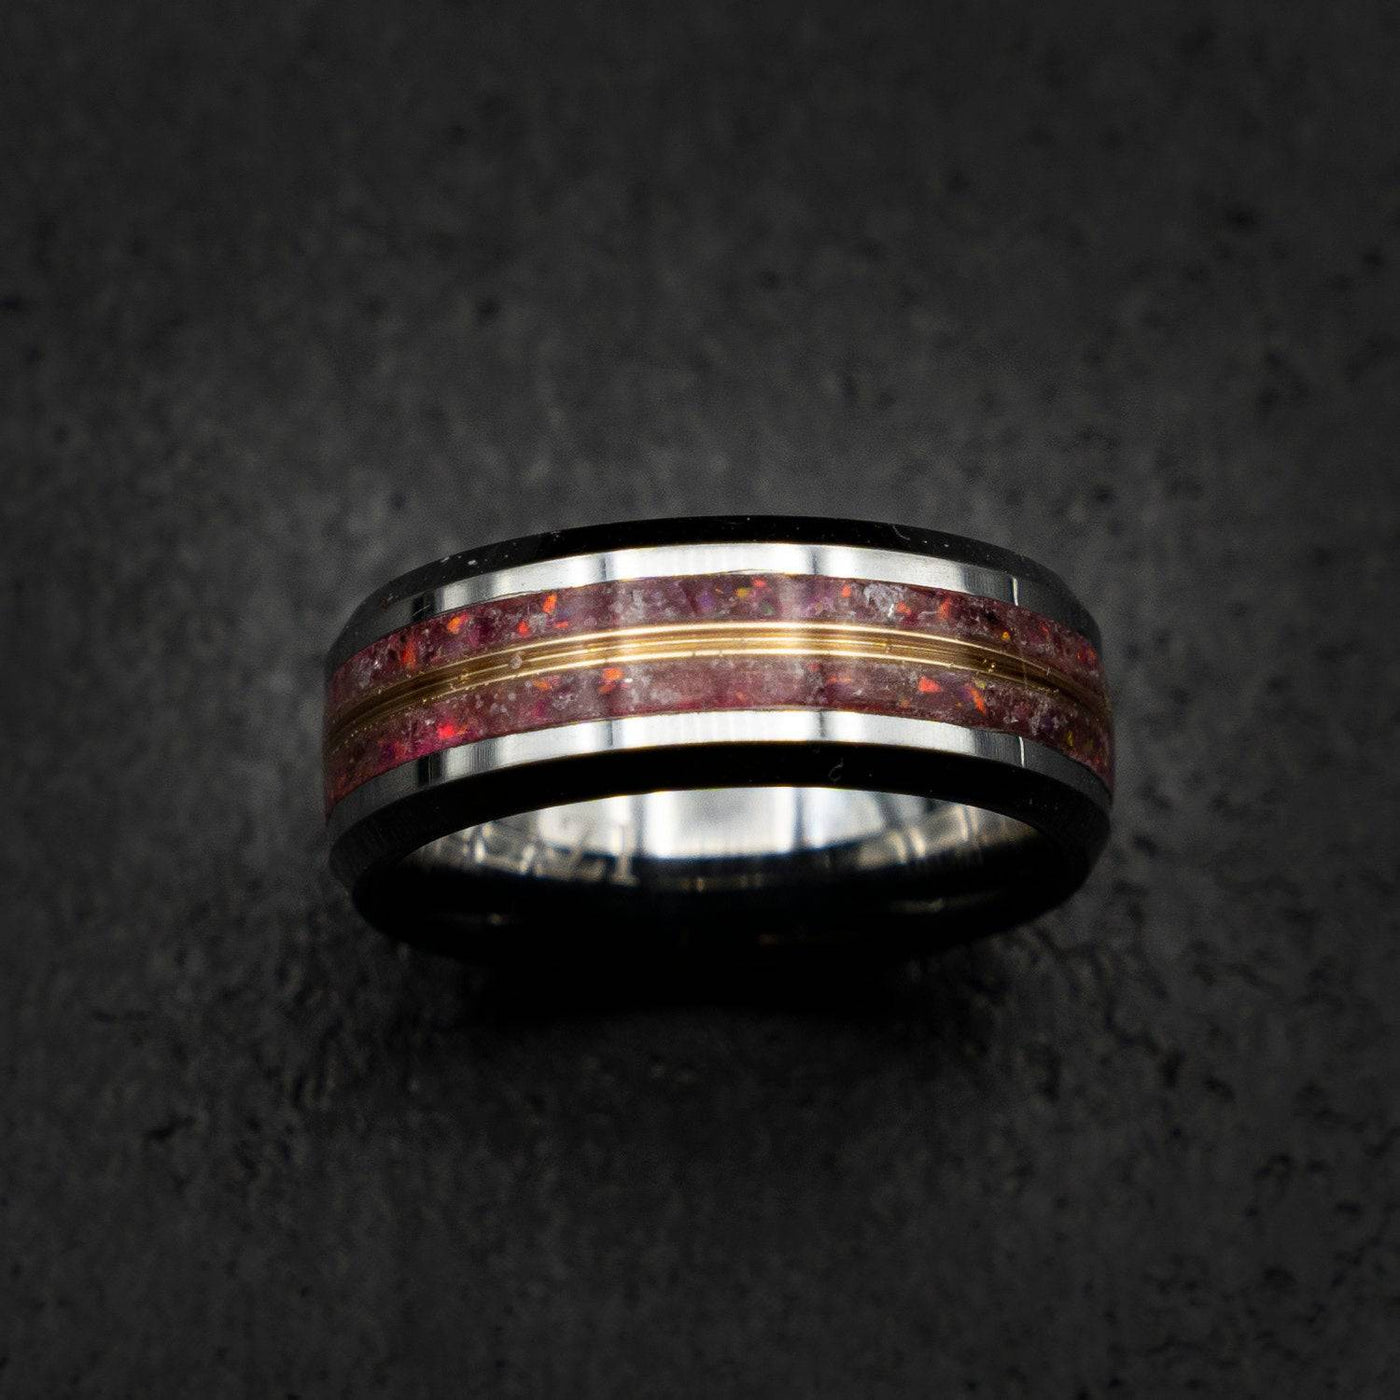 Men’s custom rings and wedding bands handcrafted with tungsten and meteorite